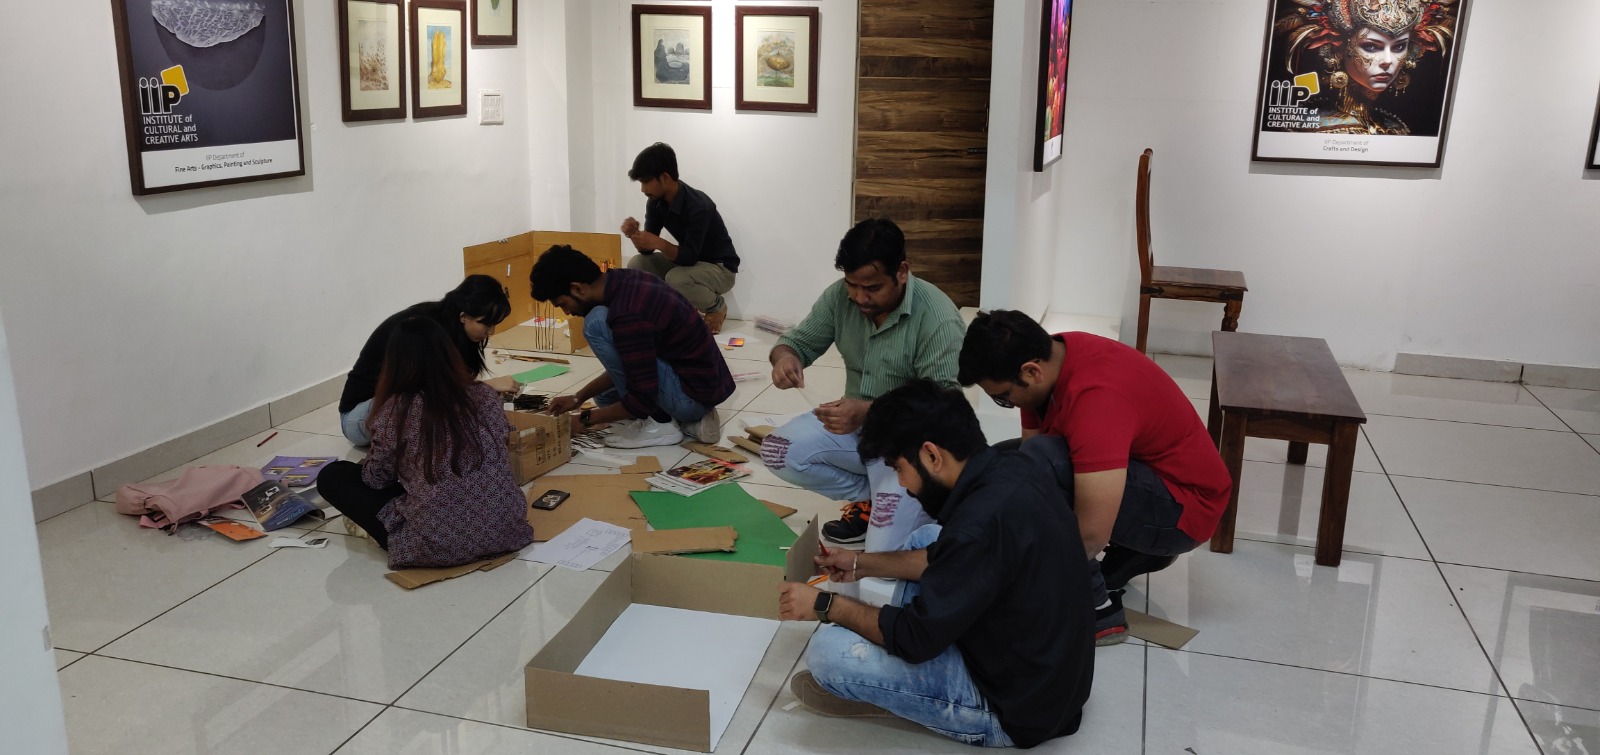 Master class on crafting and curation of exhibition was held at IIP